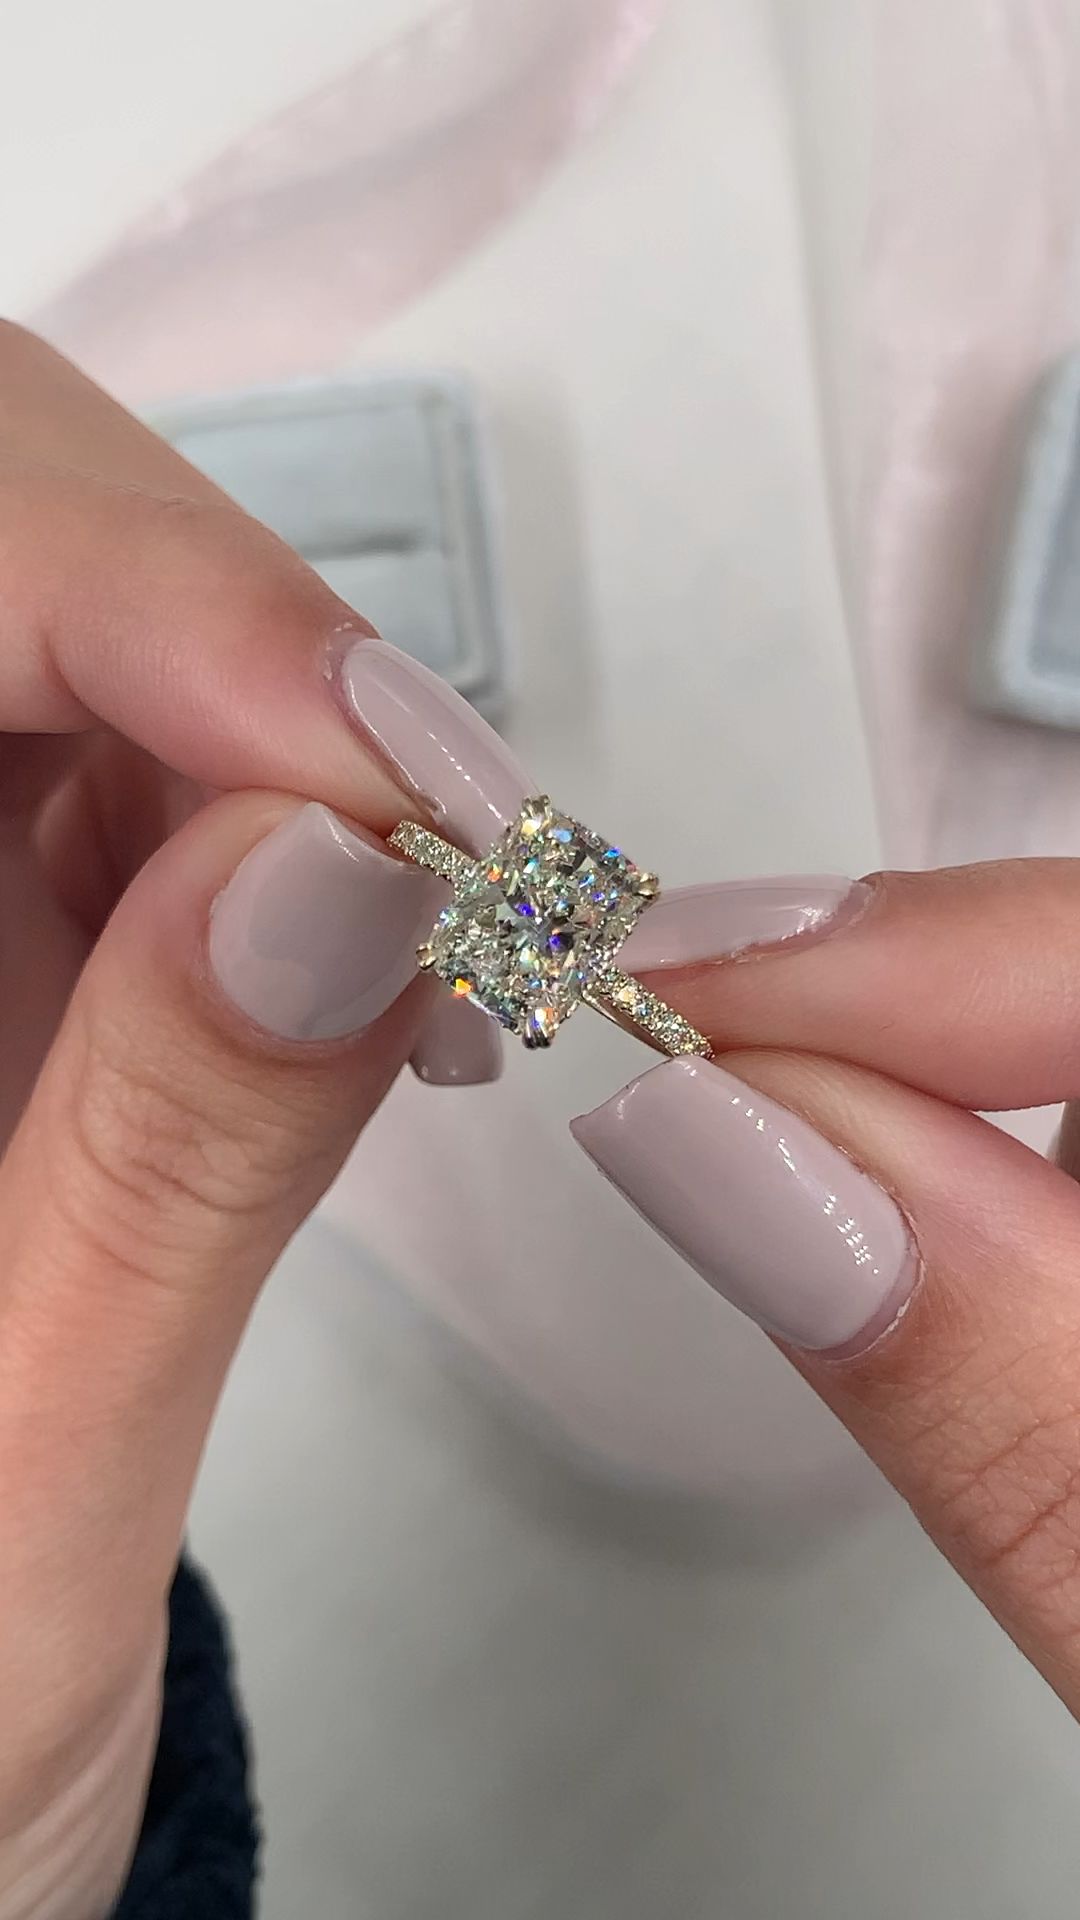 The most beautiful elongated cushion cut m. Features a double prong setting, hidden halo side stone setting in 14k yellow gold